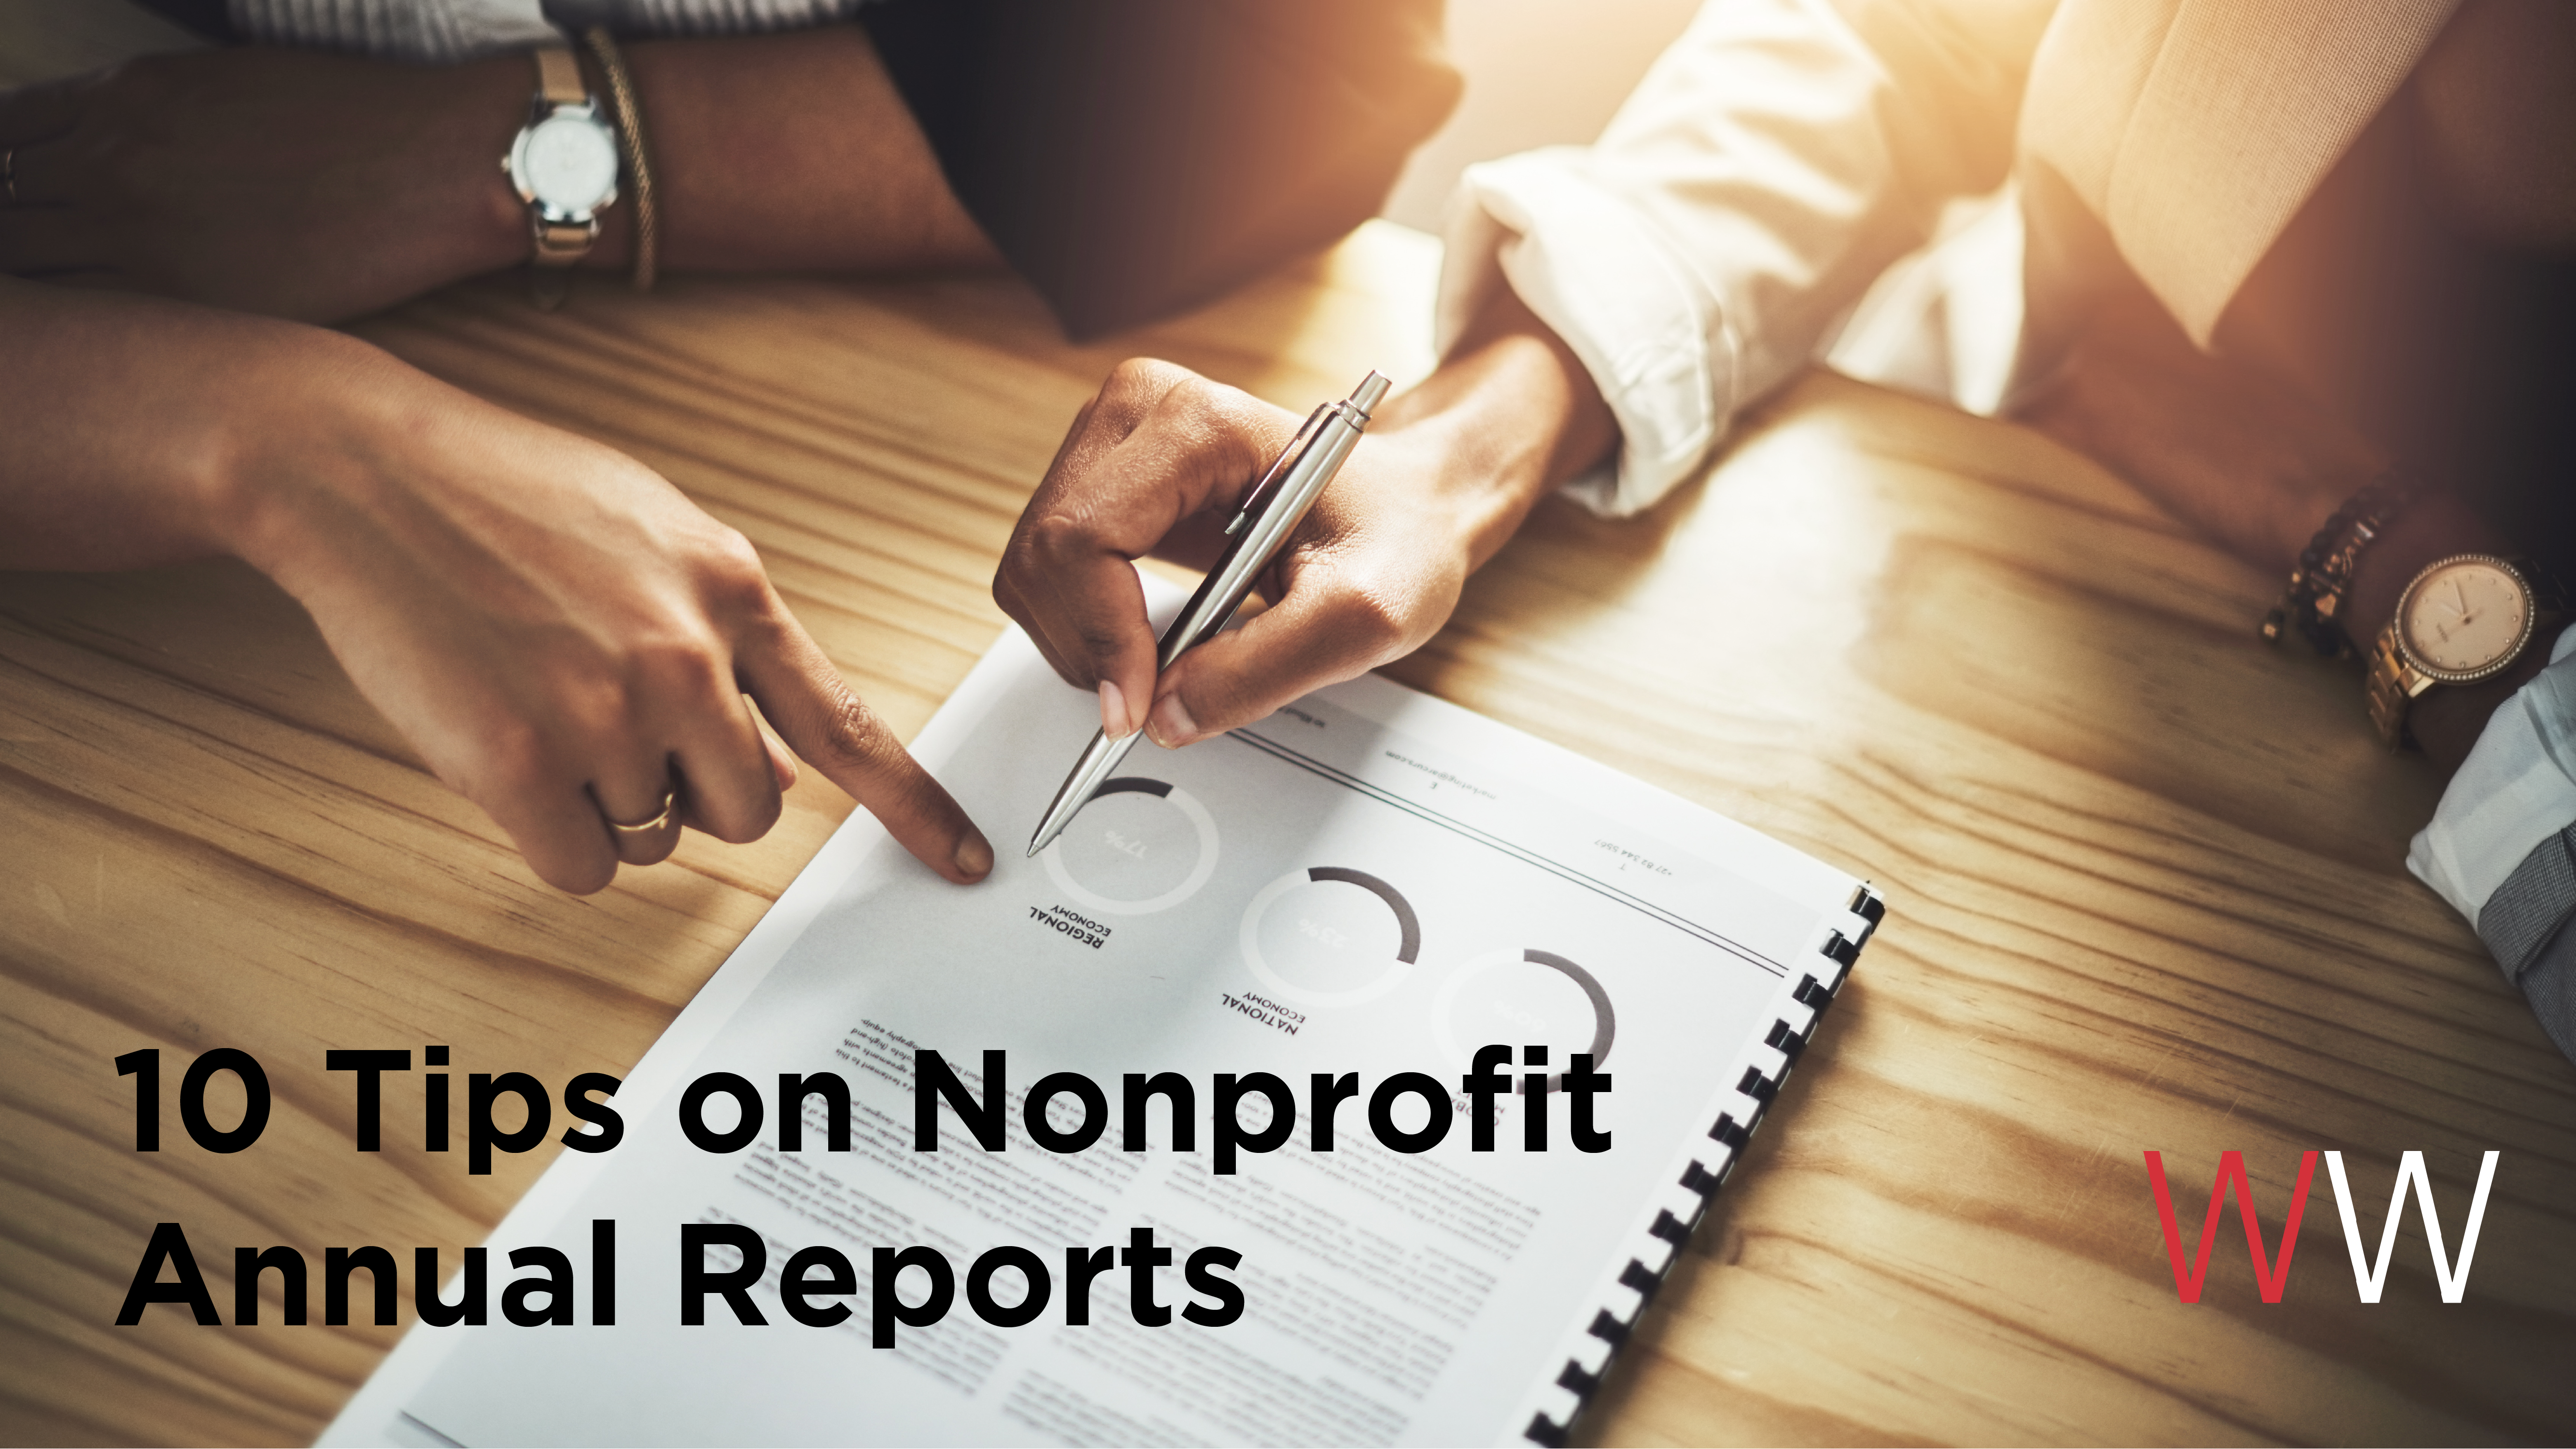 Tips on Nonprofit Annual Reports